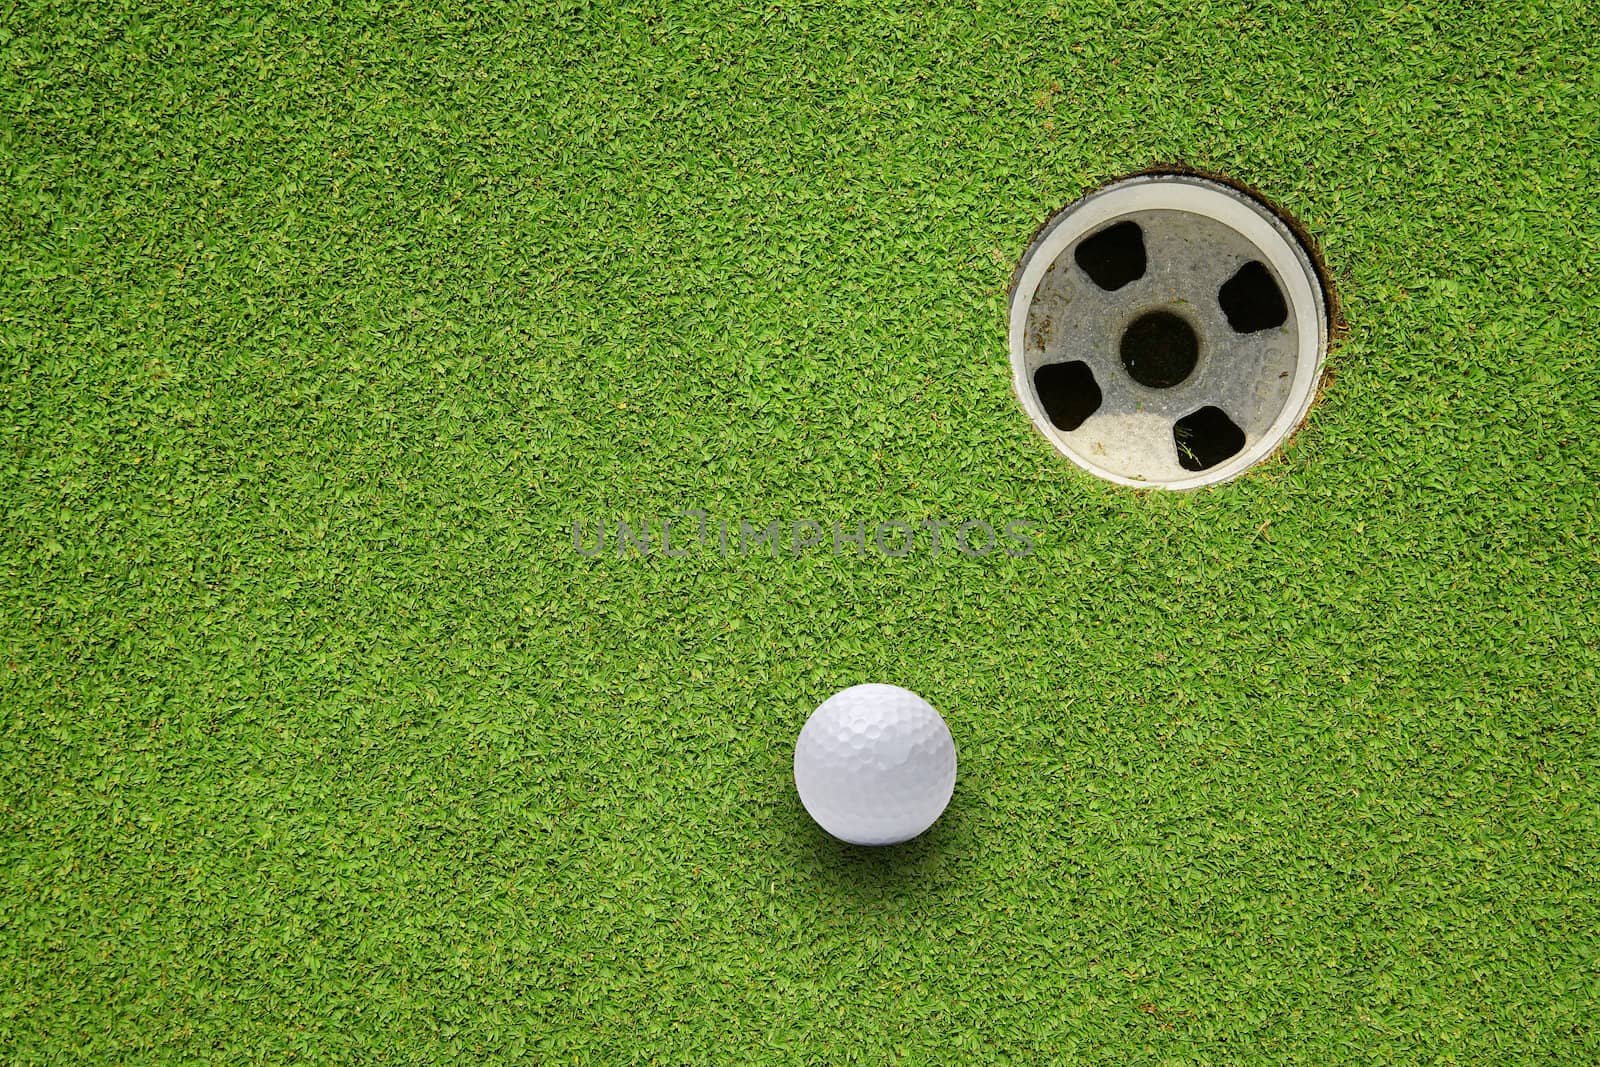 Golf ball very close to the hole